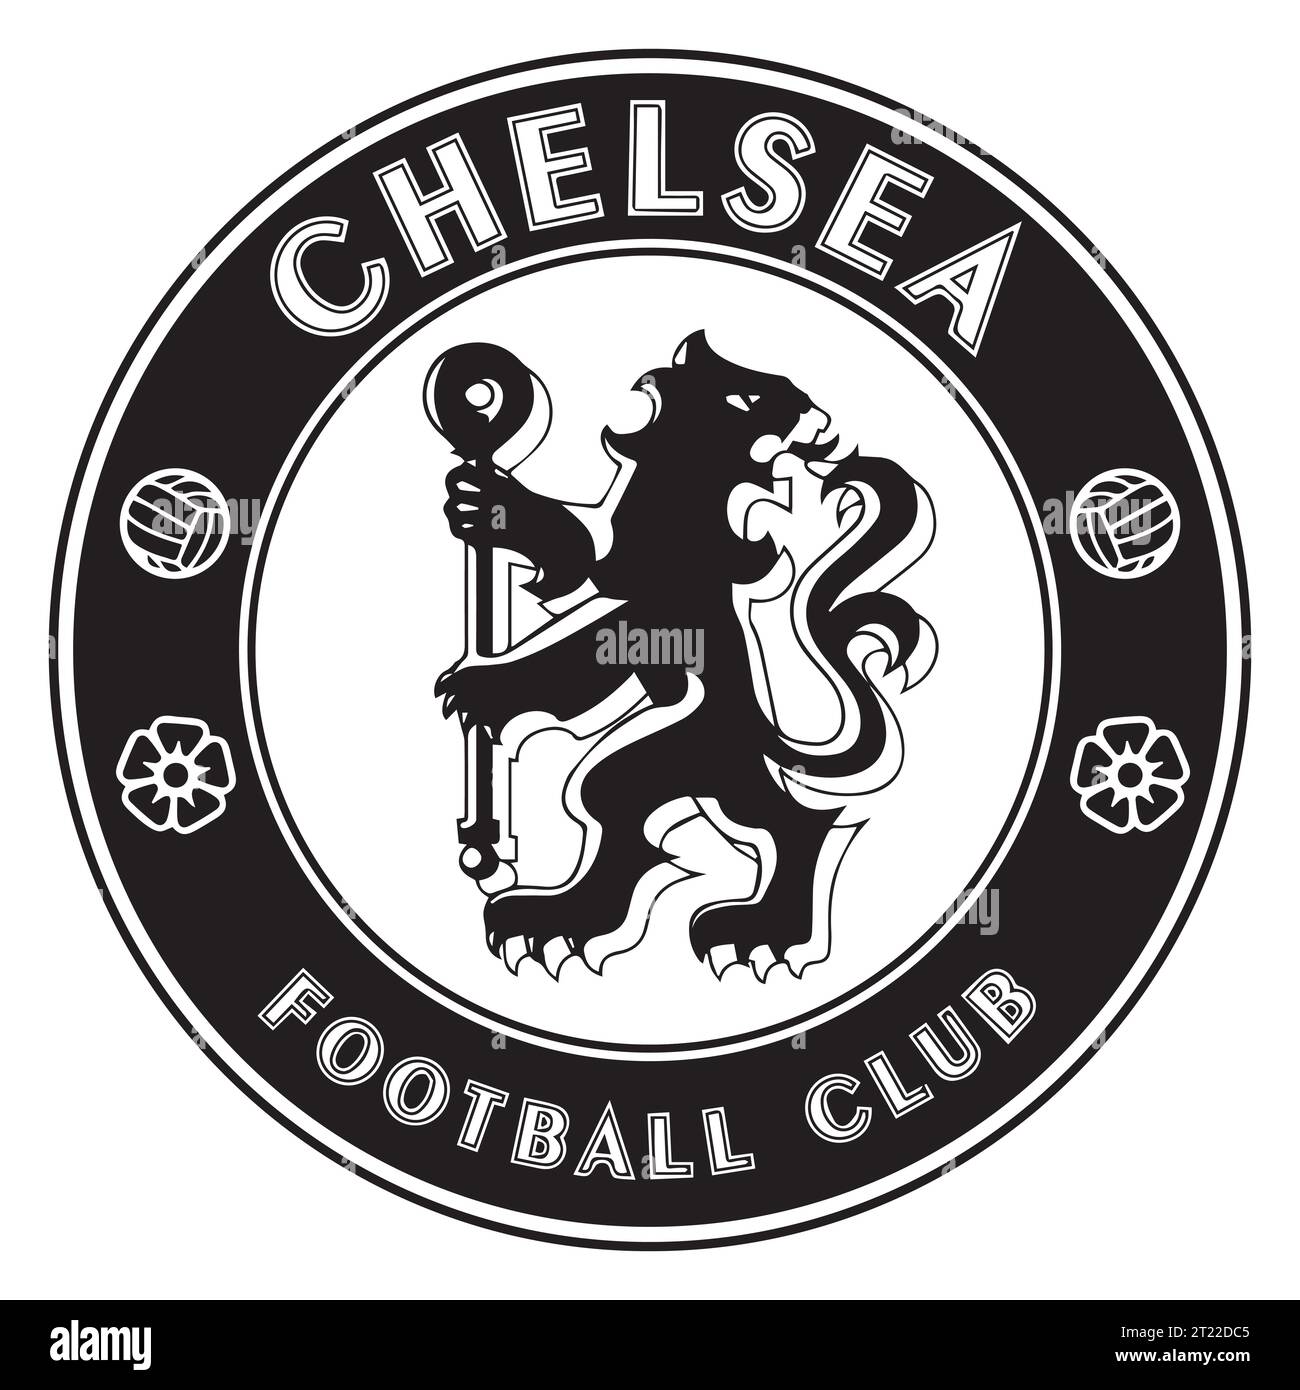 Chelsea FC Black and White Logo England Professional Football League System, Vector Illustration Abstract Black and White Editable image Illustrazione Vettoriale